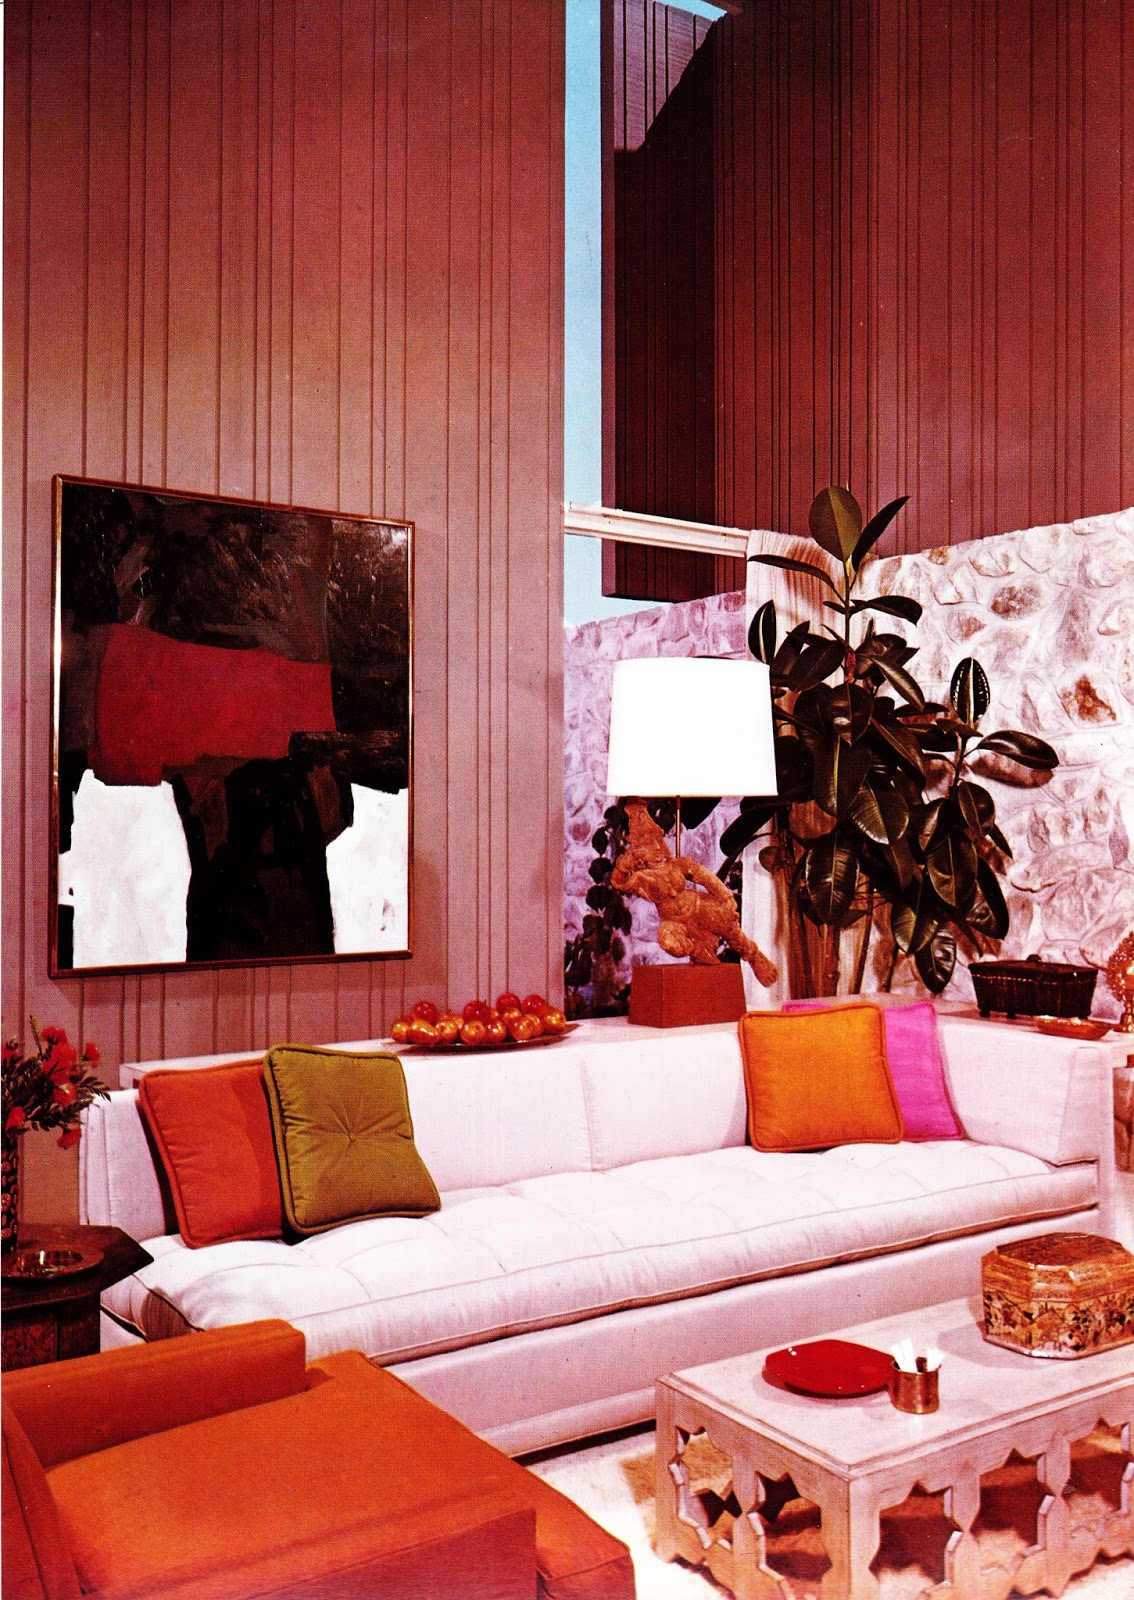 1960s interior décor: the decade of psychedelia gave rise